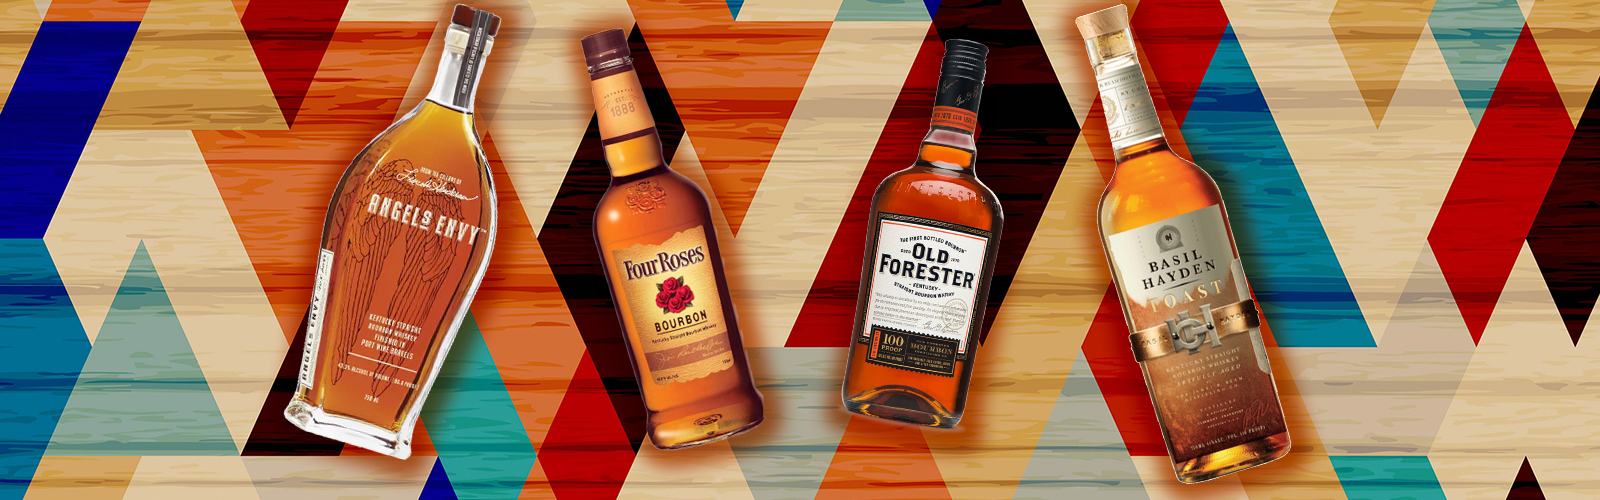 Angel's Envy/Four Roses/Old Forester/Jim Beam/istock/Uproxx